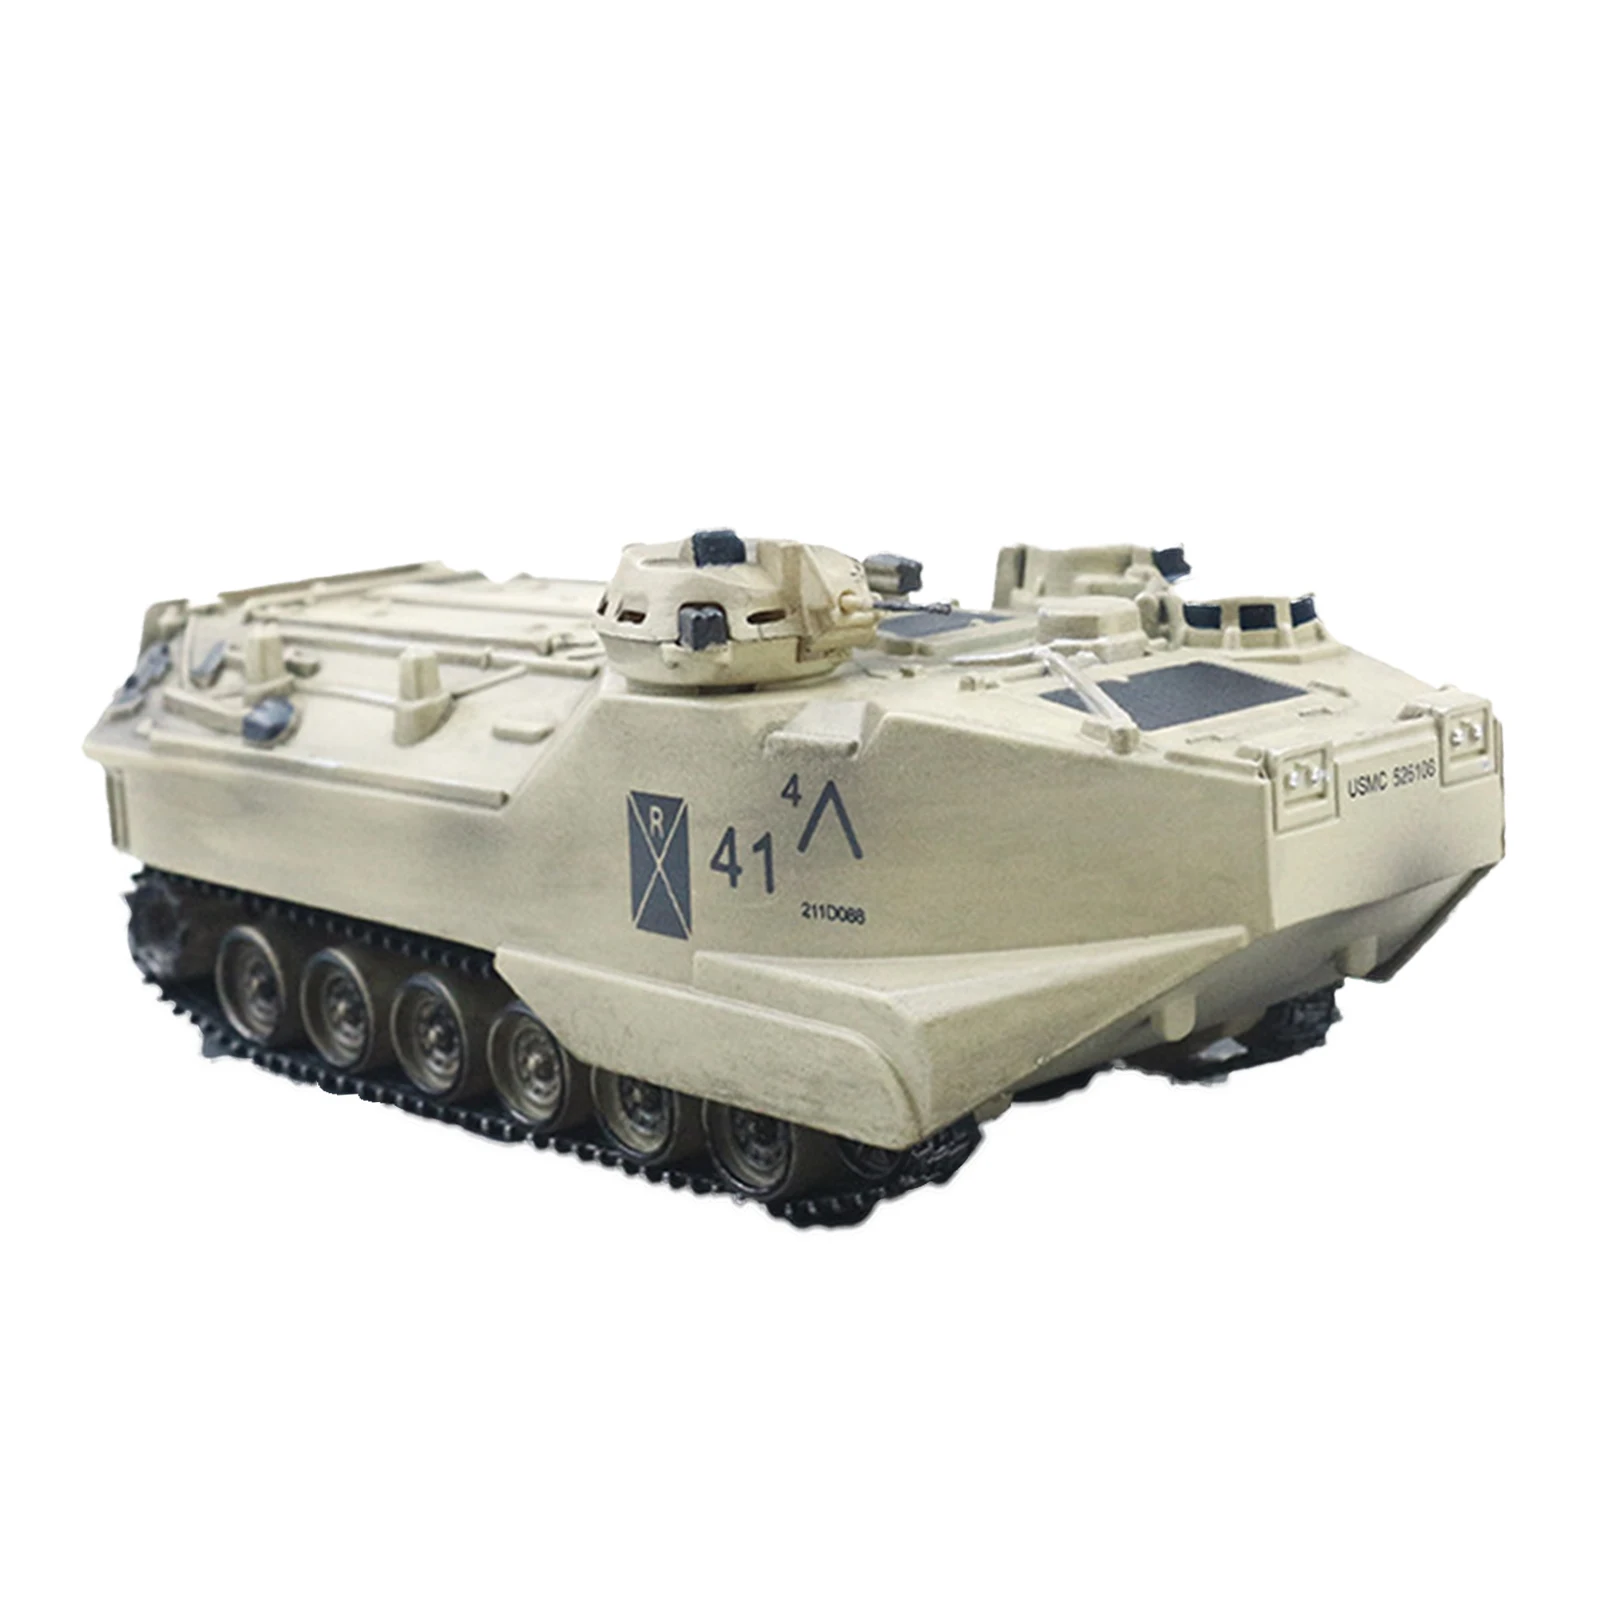 1/72 Scale American AAV7A1 Tank Model with Dustproof Case Home Office Display Tank Model Home Decor Accessory Crafts